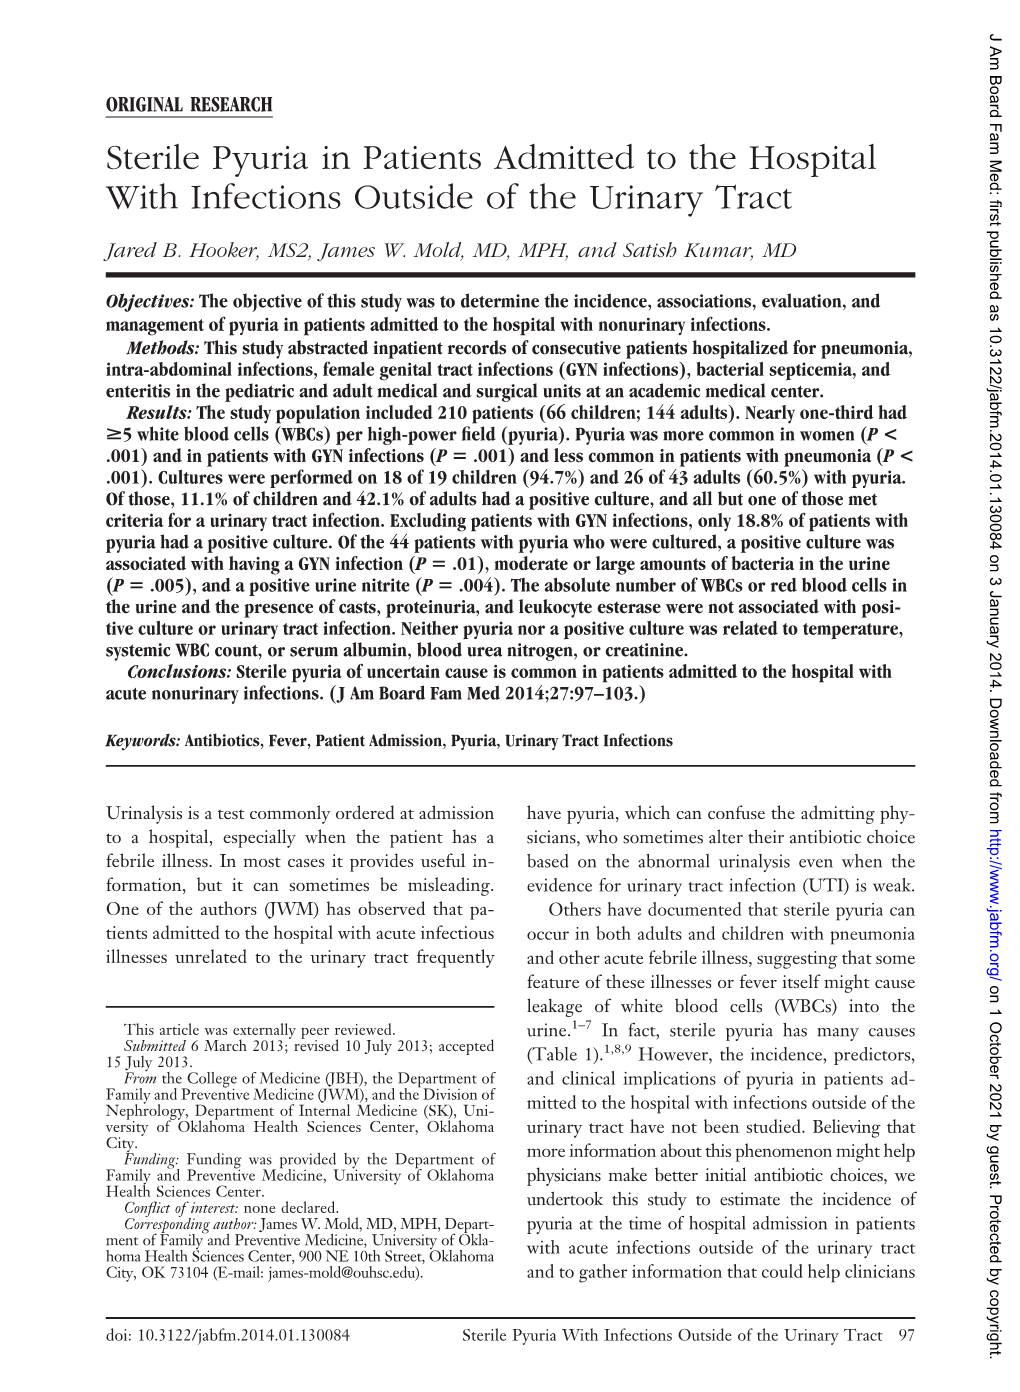 Sterile Pyuria in Patients Admitted to the Hospital with Infections Outside of the Urinary Tract